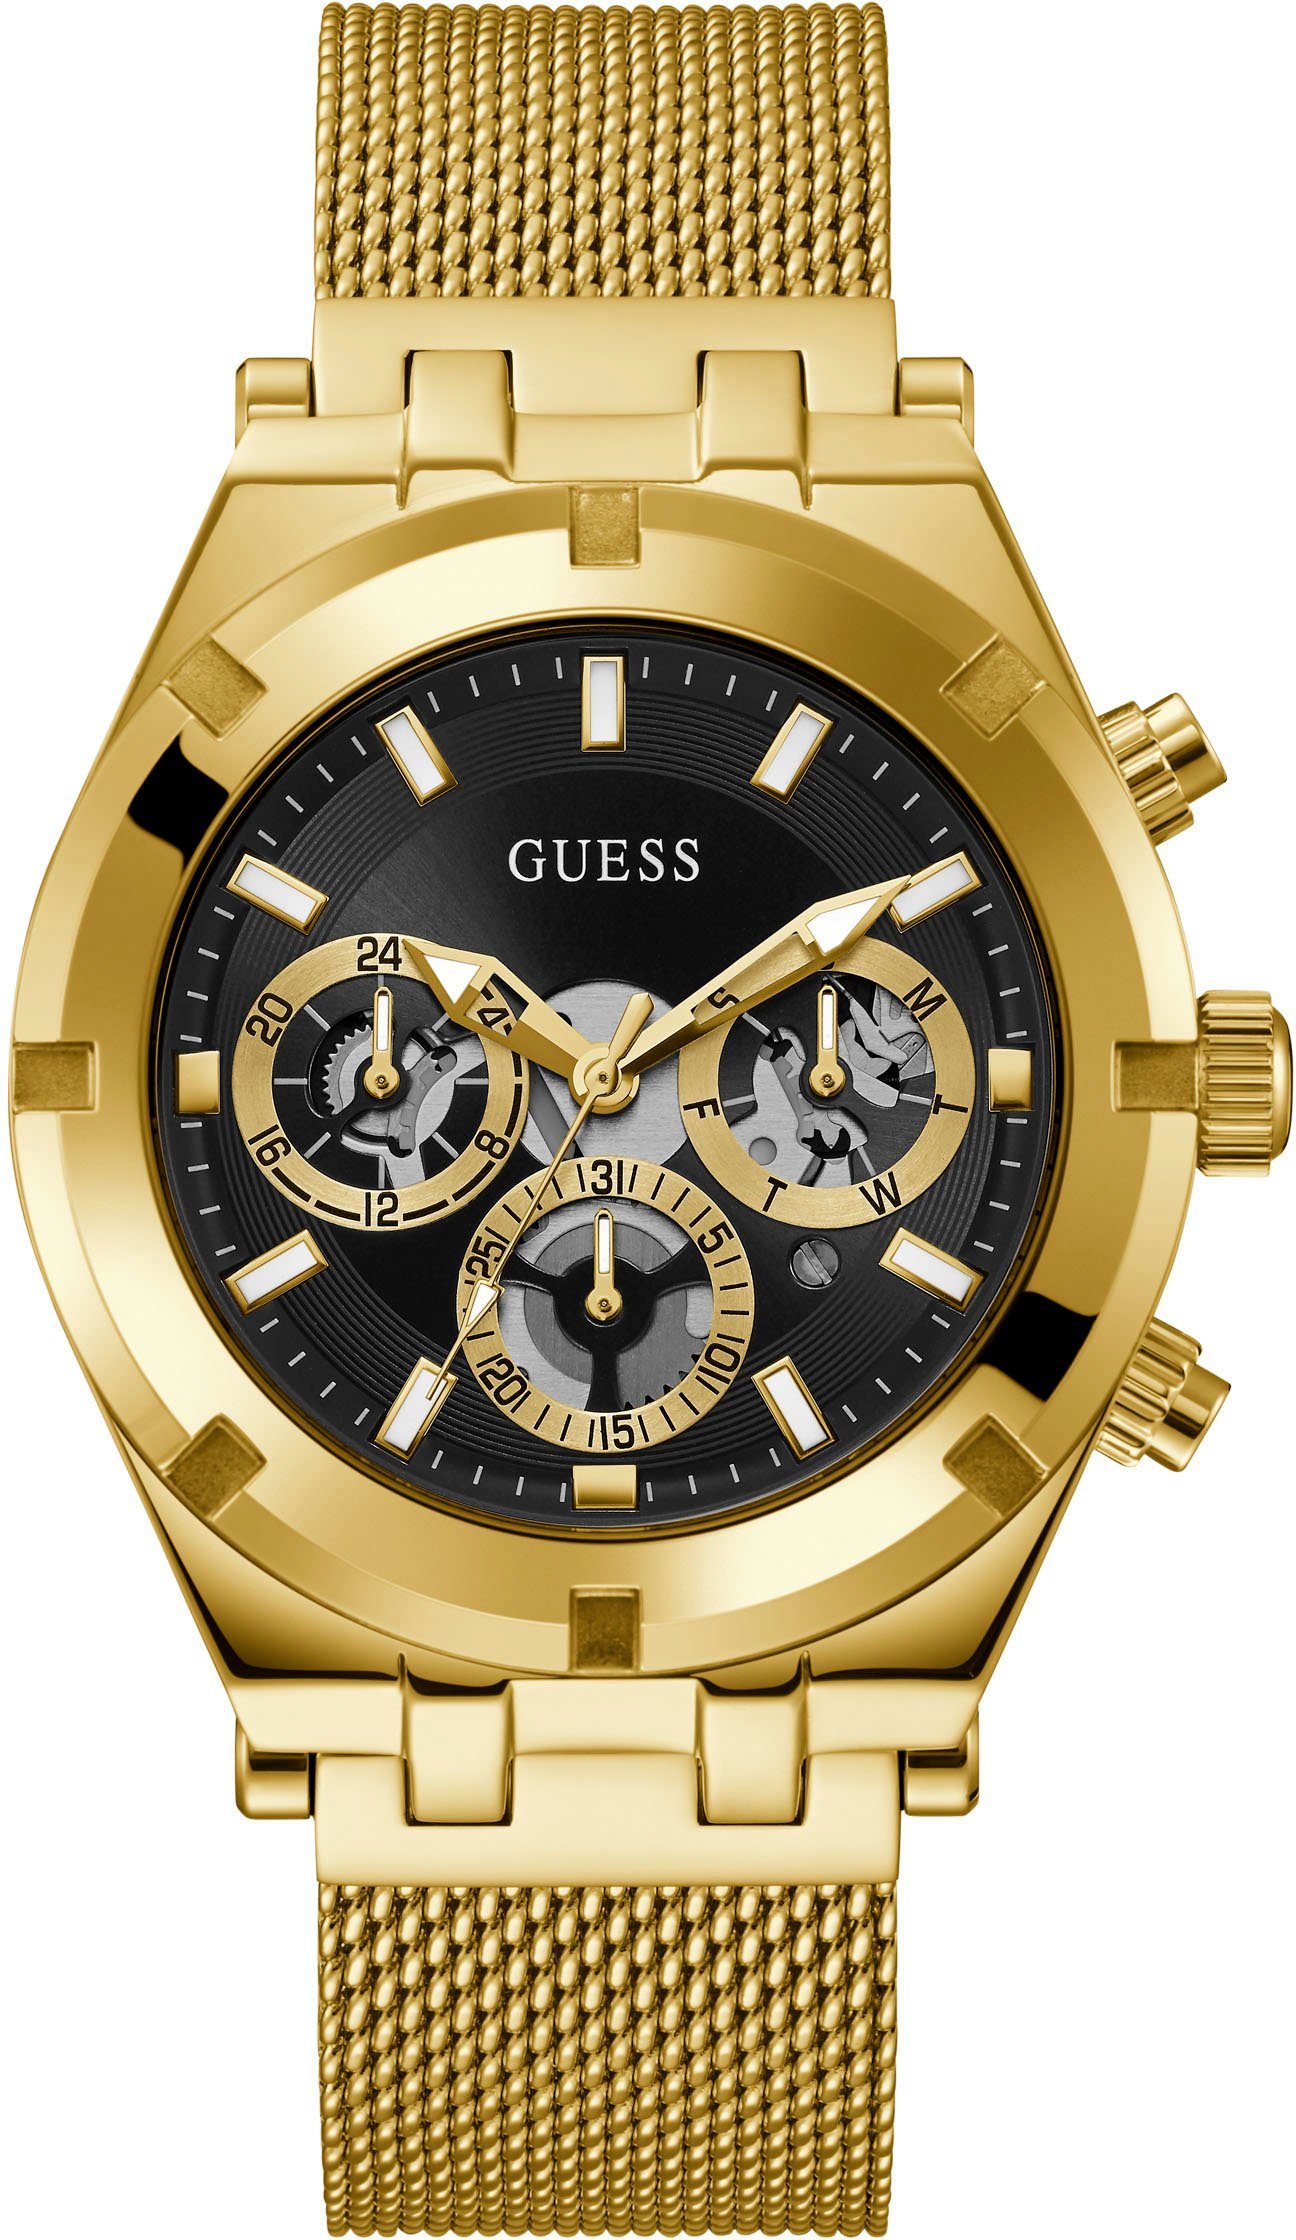 Multifunktionsuhr Guess GW0582G2